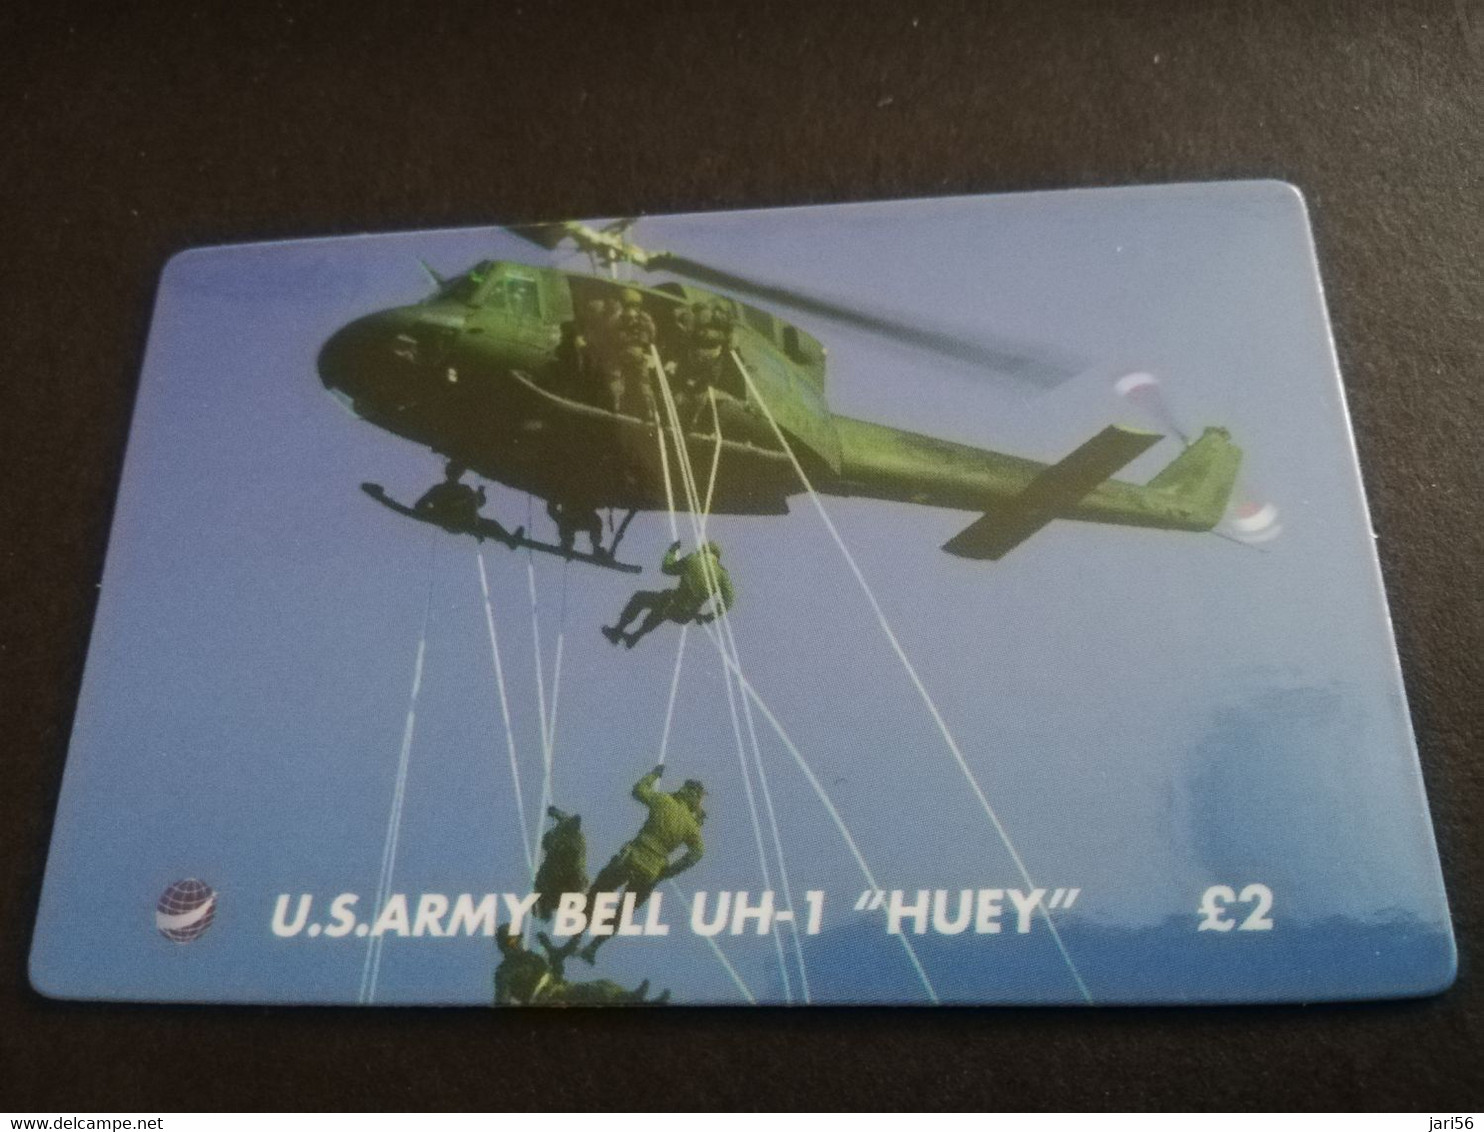 GREAT BRITAIN   2 POUND  AIR PLANES   U.S. ARMY BELL UH-1 'HUEY'    PREPAID CARD      **5459** - [10] Collections